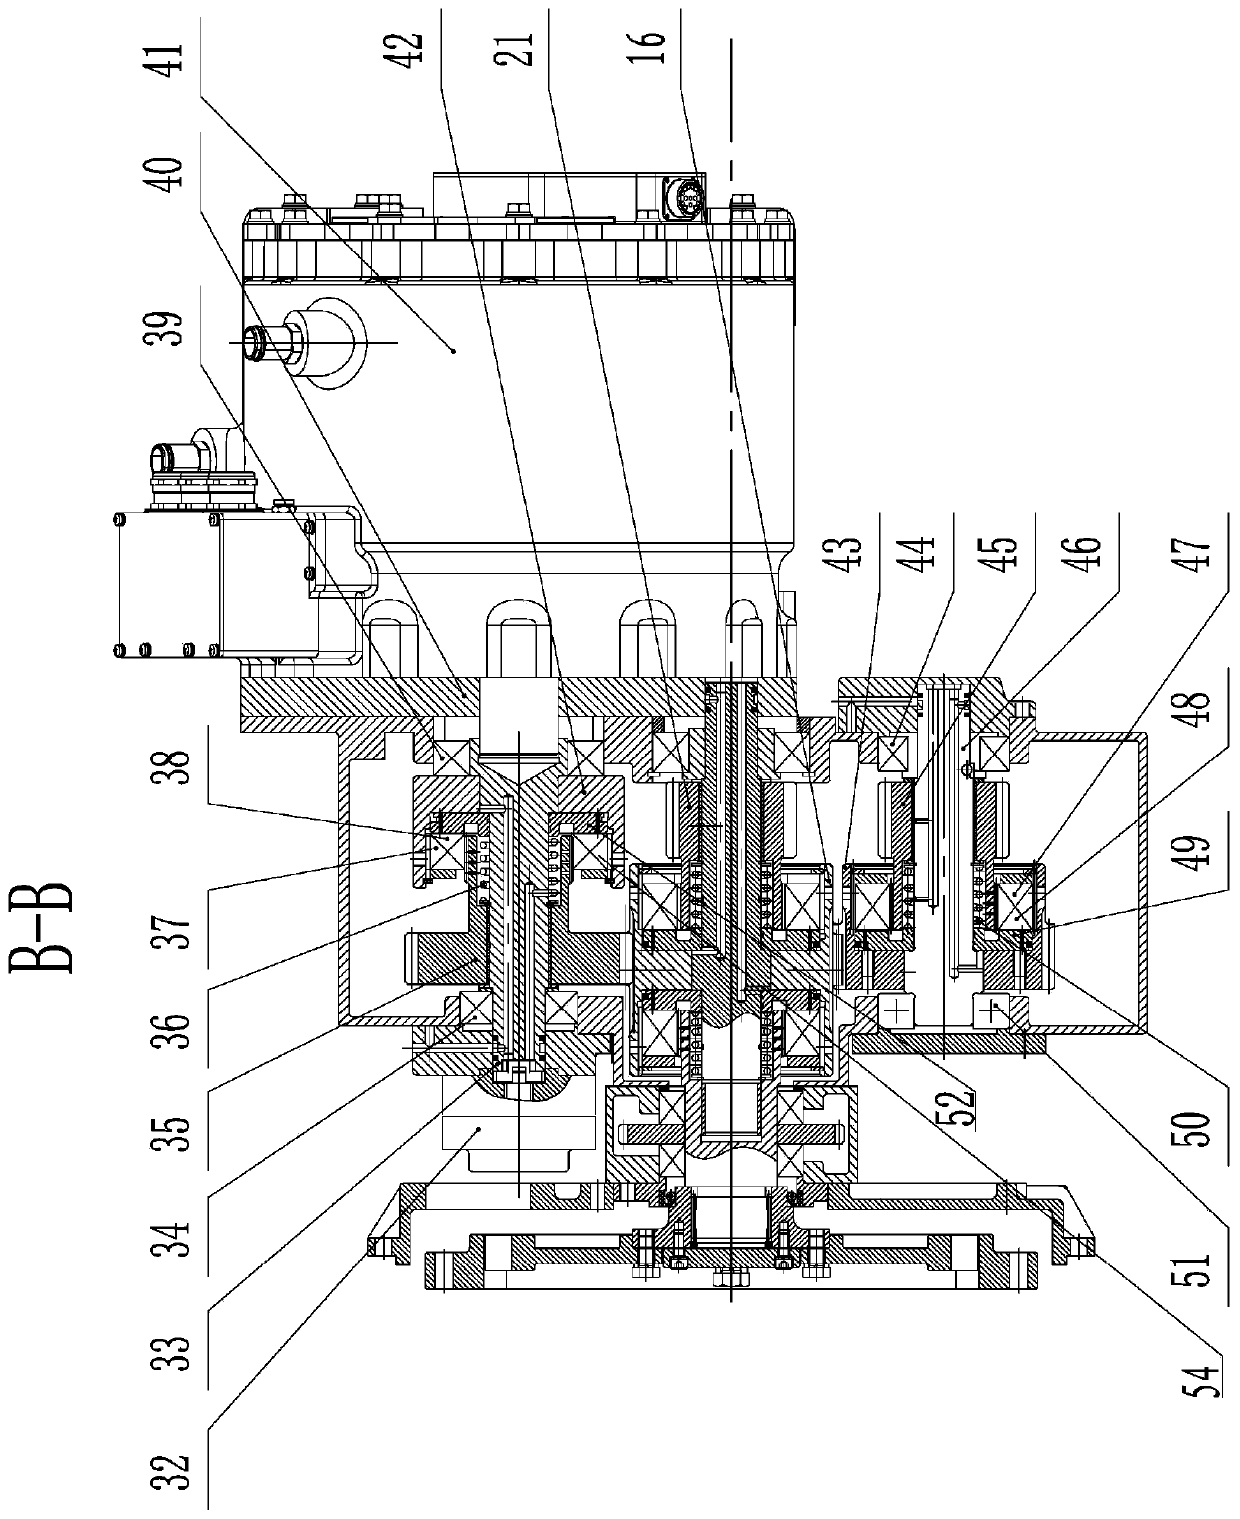 Oil-electric hybrid power input ship gearbox